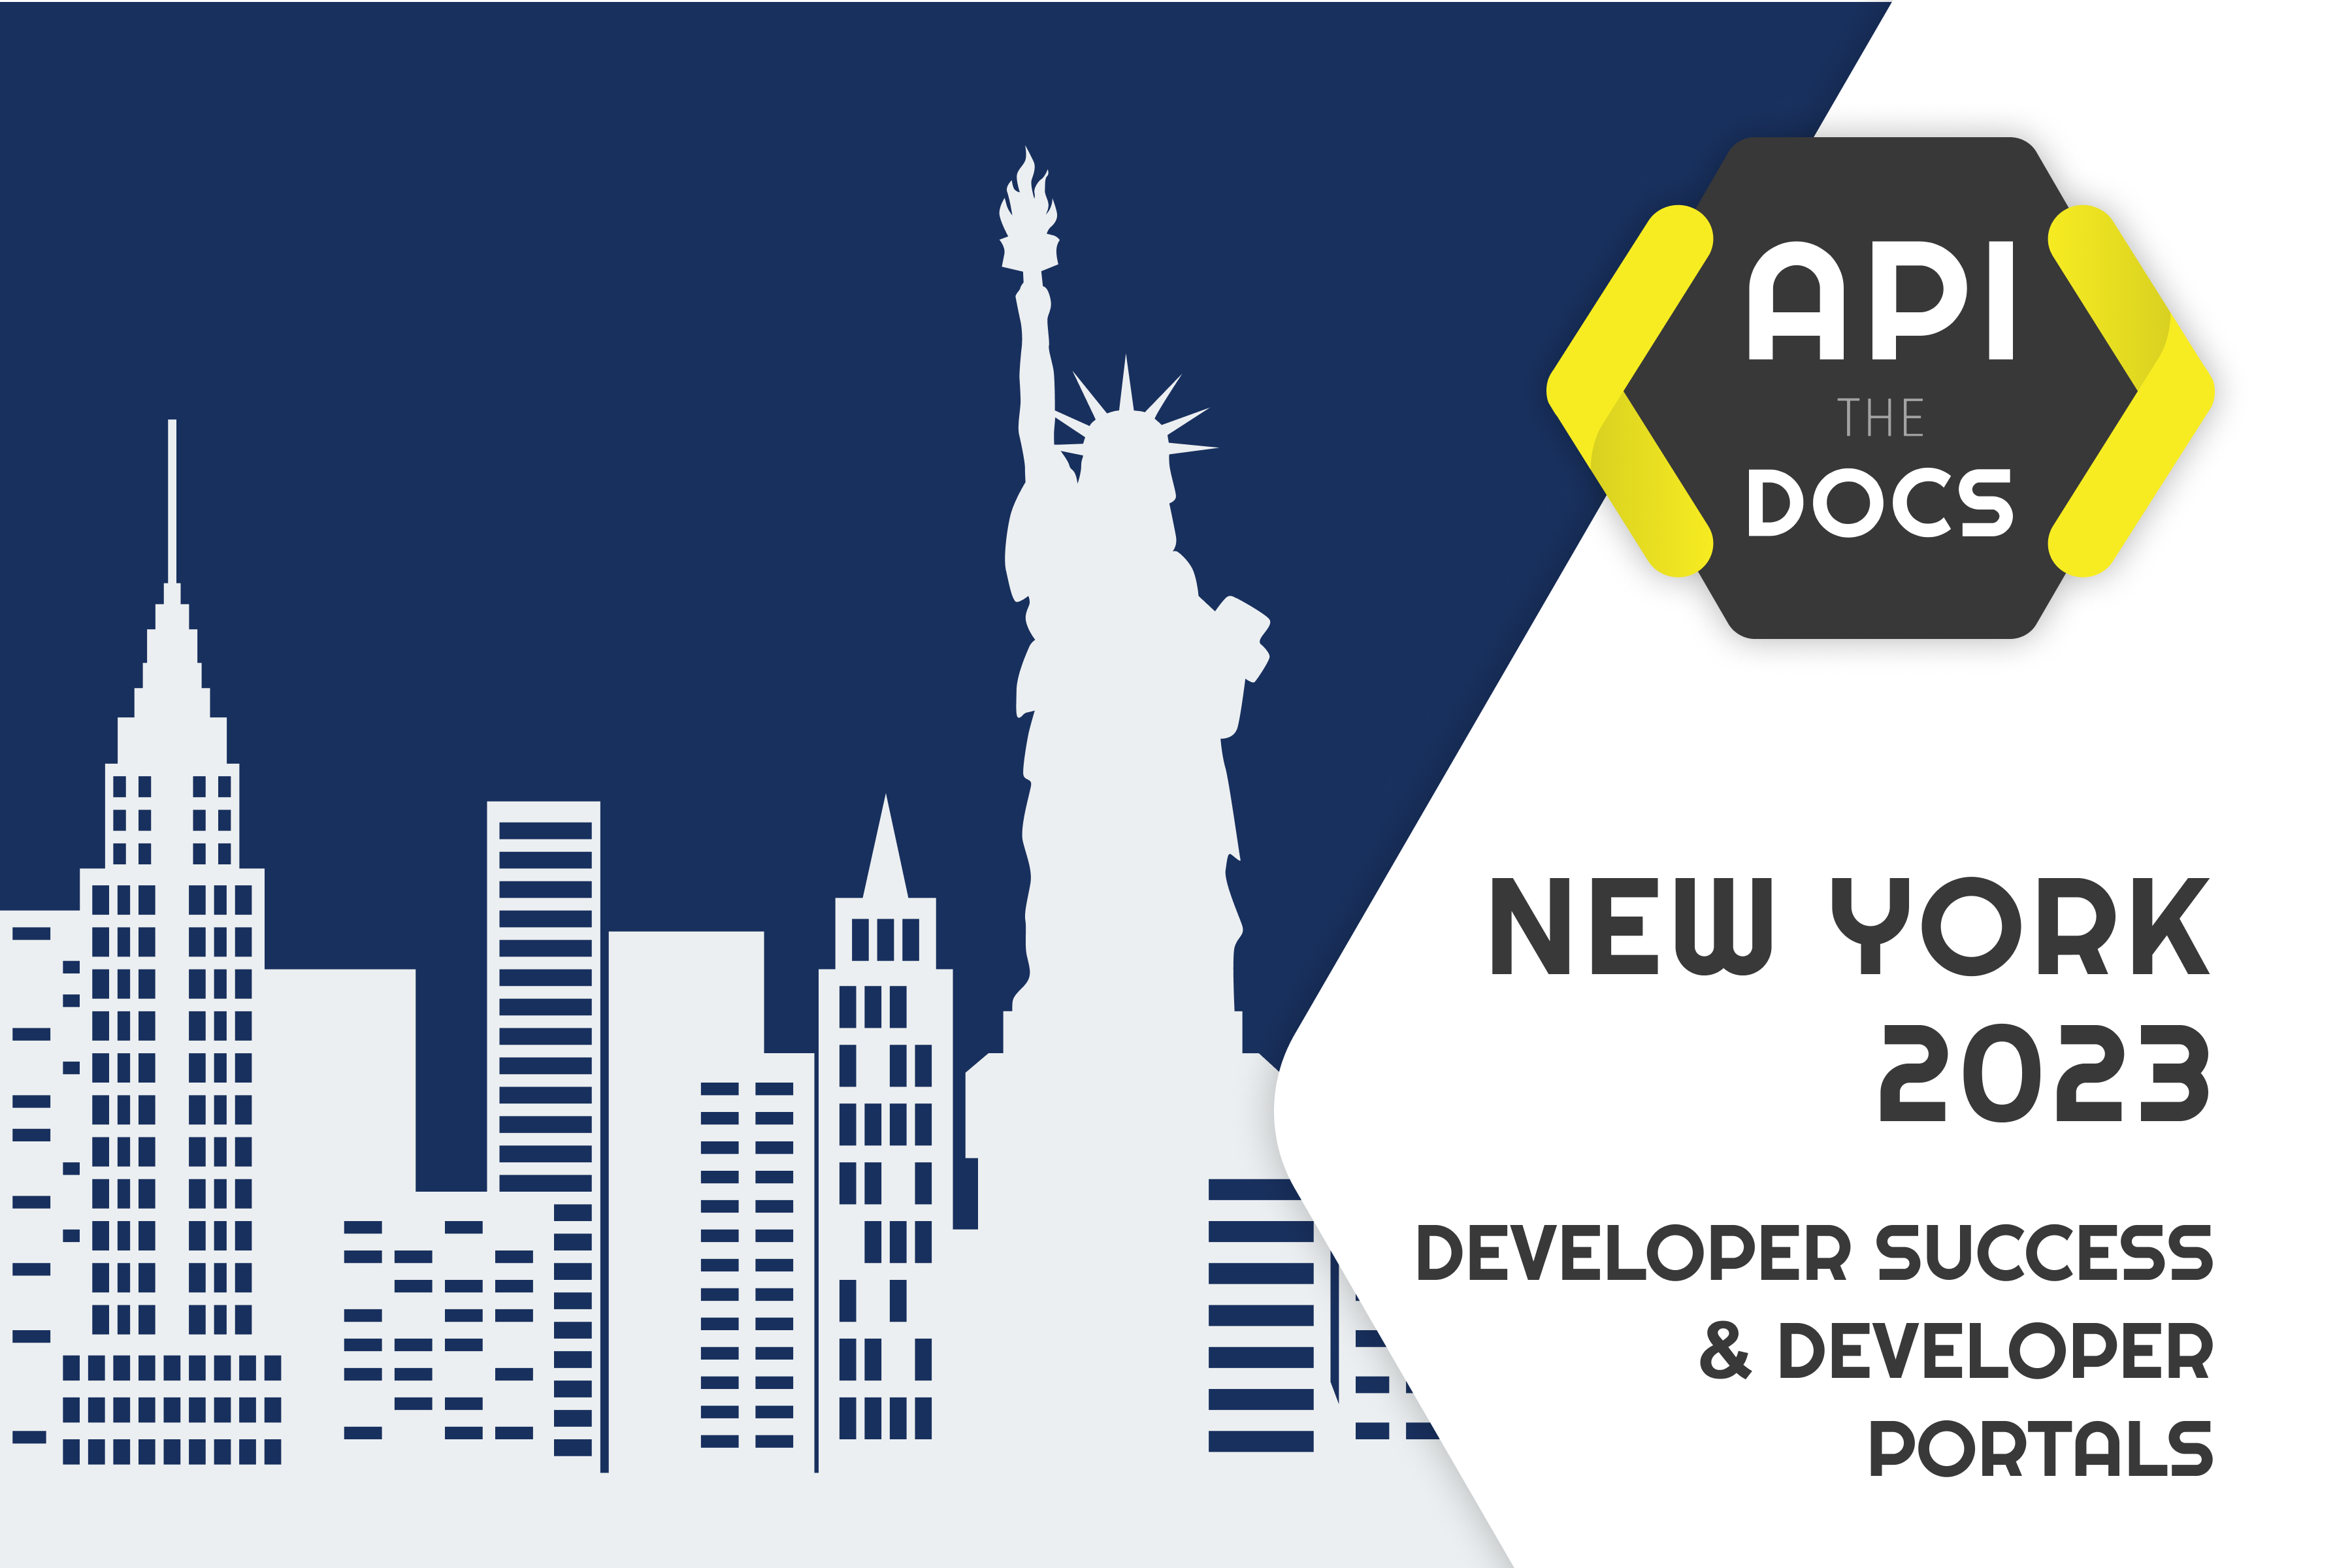 The New York landscape with the API the Docs logo